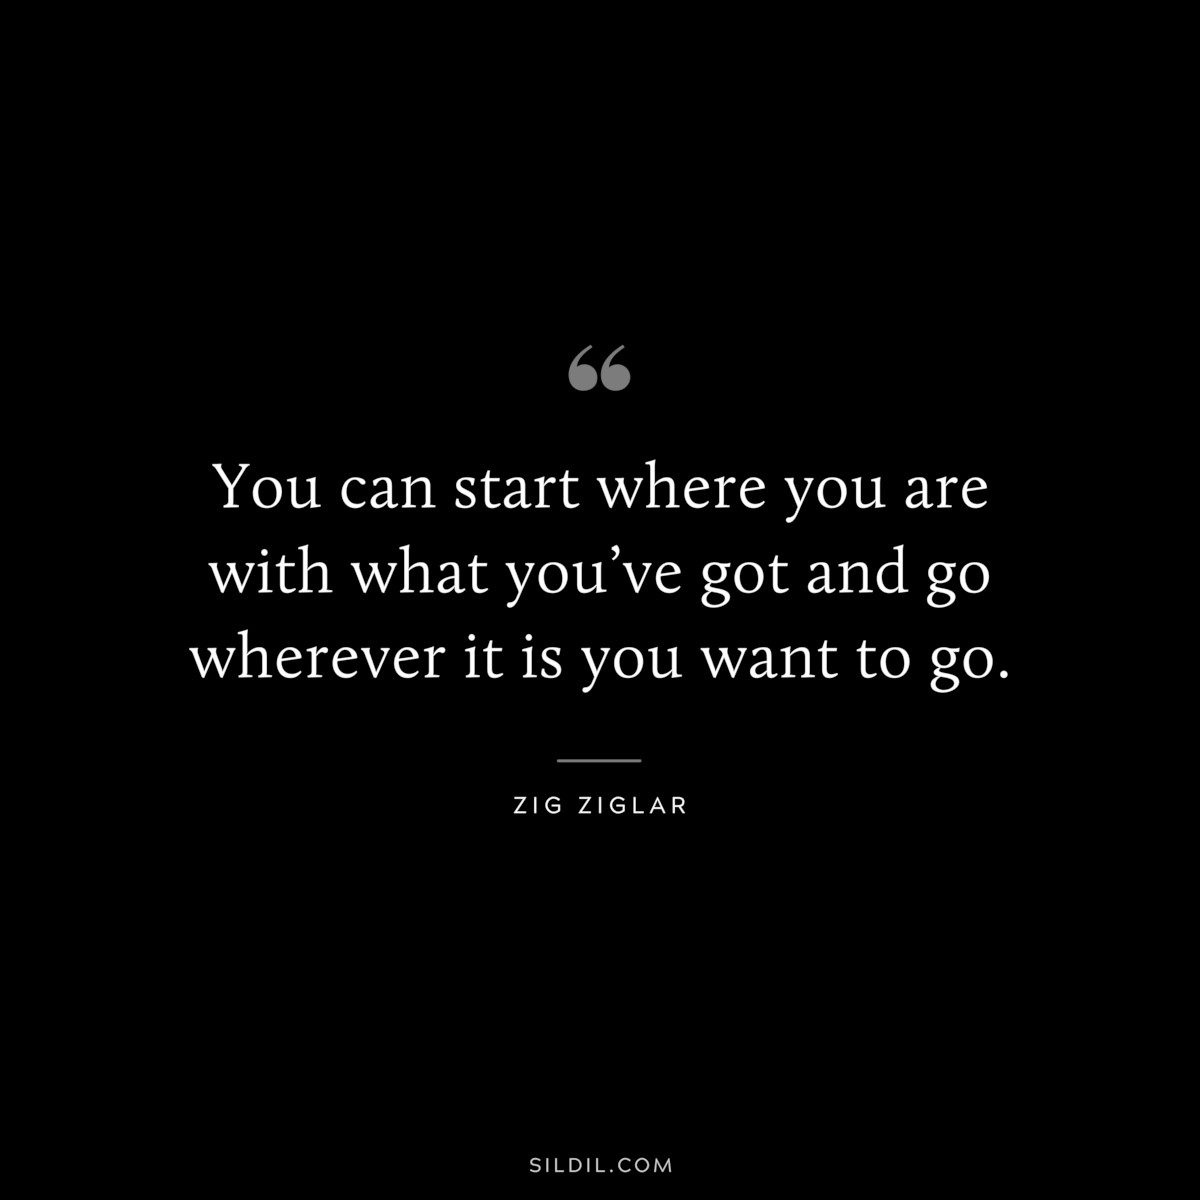 You can start where you are with what you’ve got and go wherever it is you want to go. ― Zig Ziglar